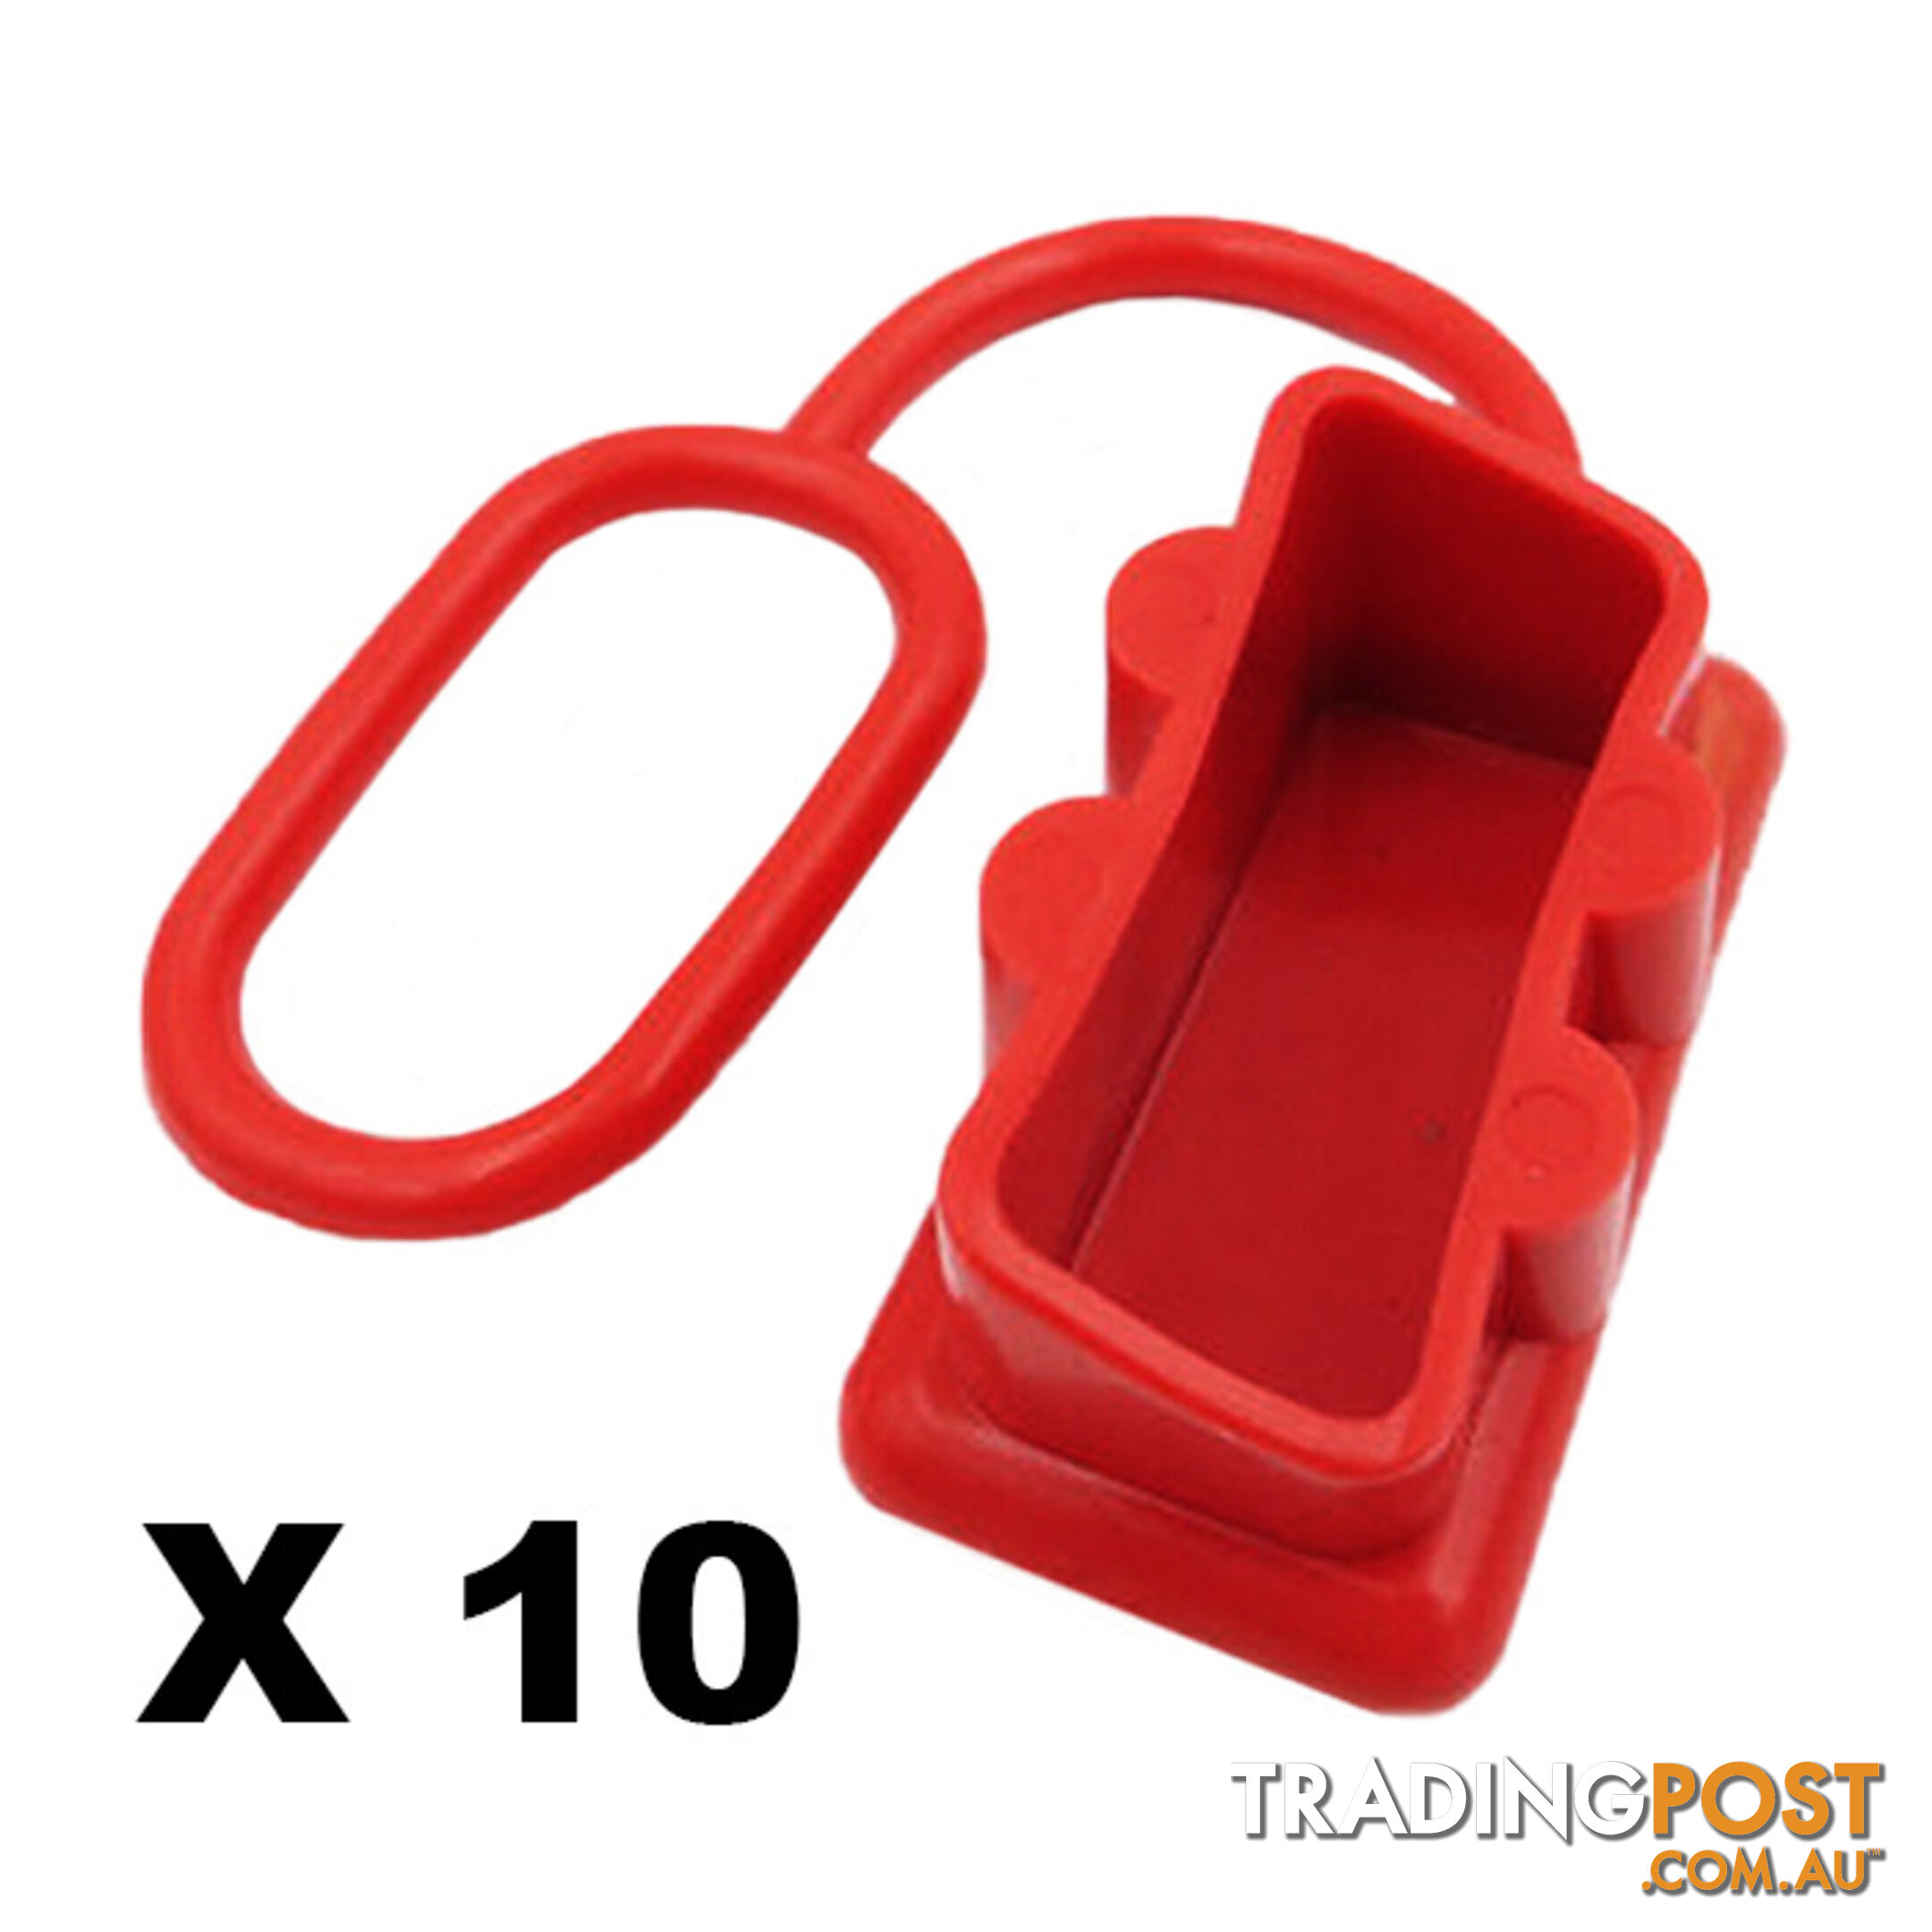 Dust Cap Red x10 to Suit 50 Amp Anderson Plug Dual Battery 50a End Cap SKU - BB-50ampCapRedx10